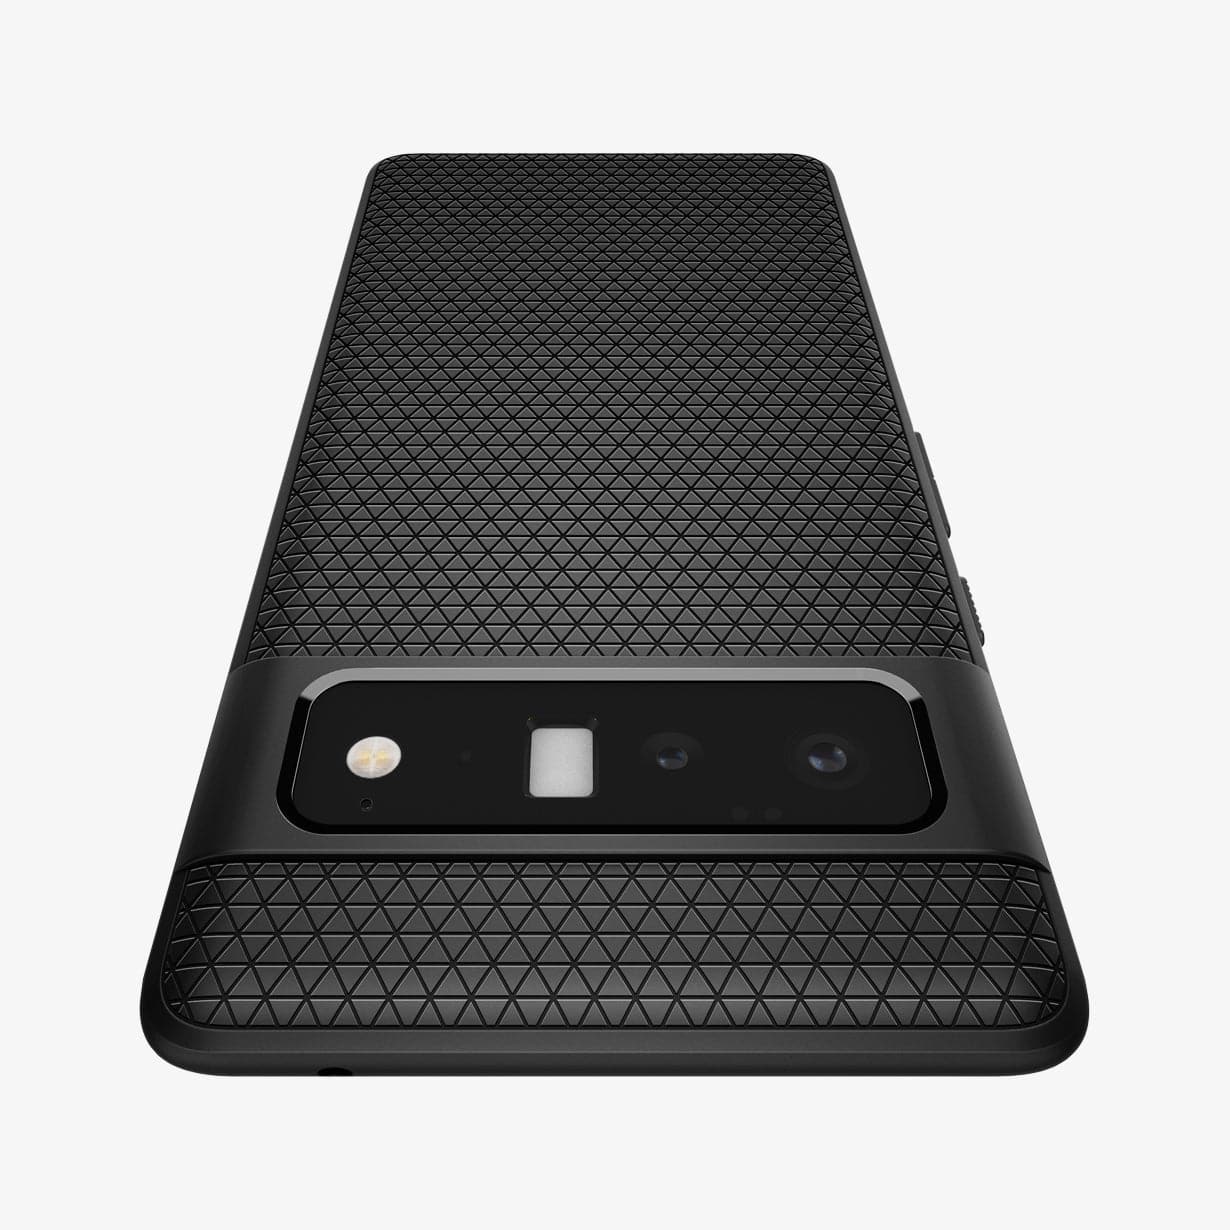 ACS03455 - Pixel 6 Pro Case Liquid Air in black showing the back zoomed in to show the fine details